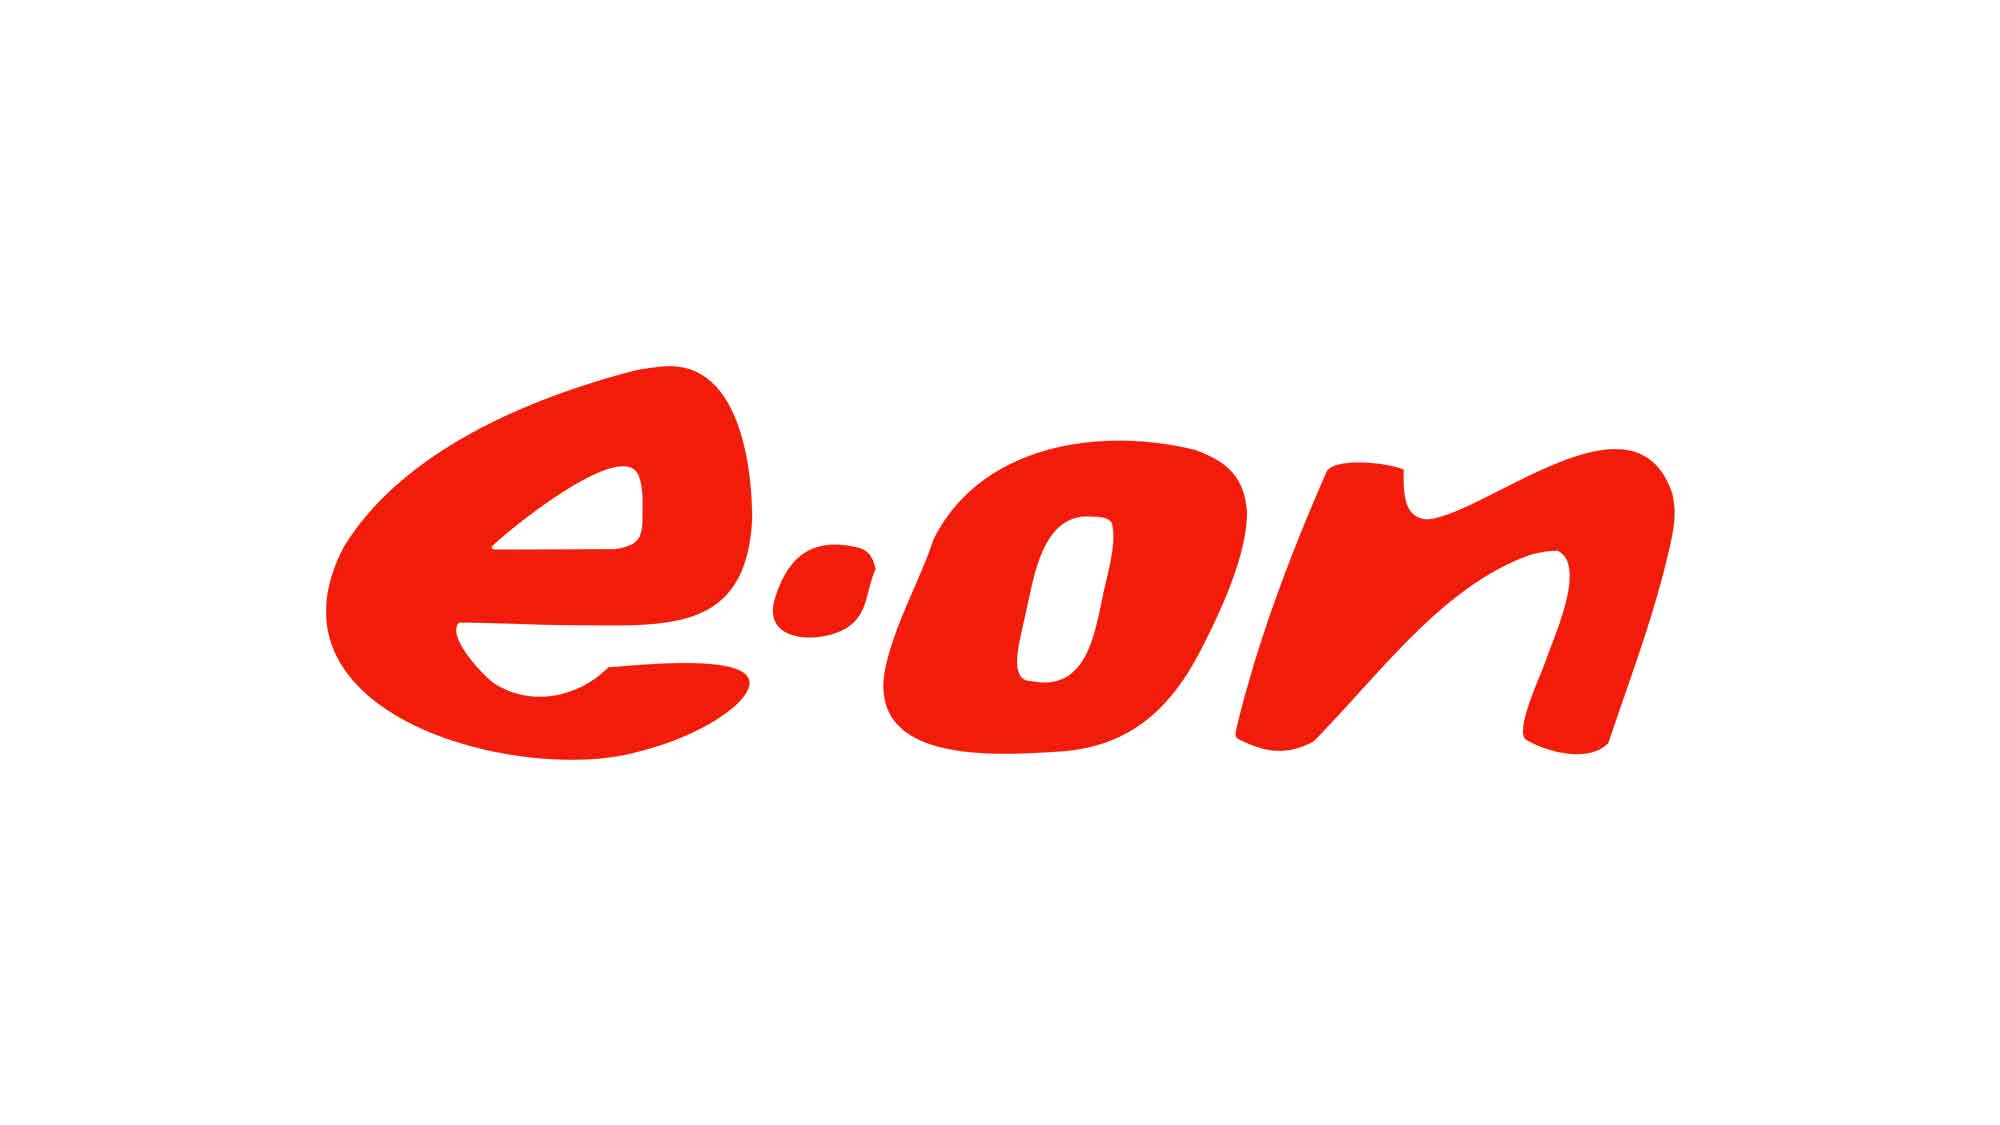 “It’s on us—to make new energy work”: Responsibility at the core of E.ON’s new brand strategy